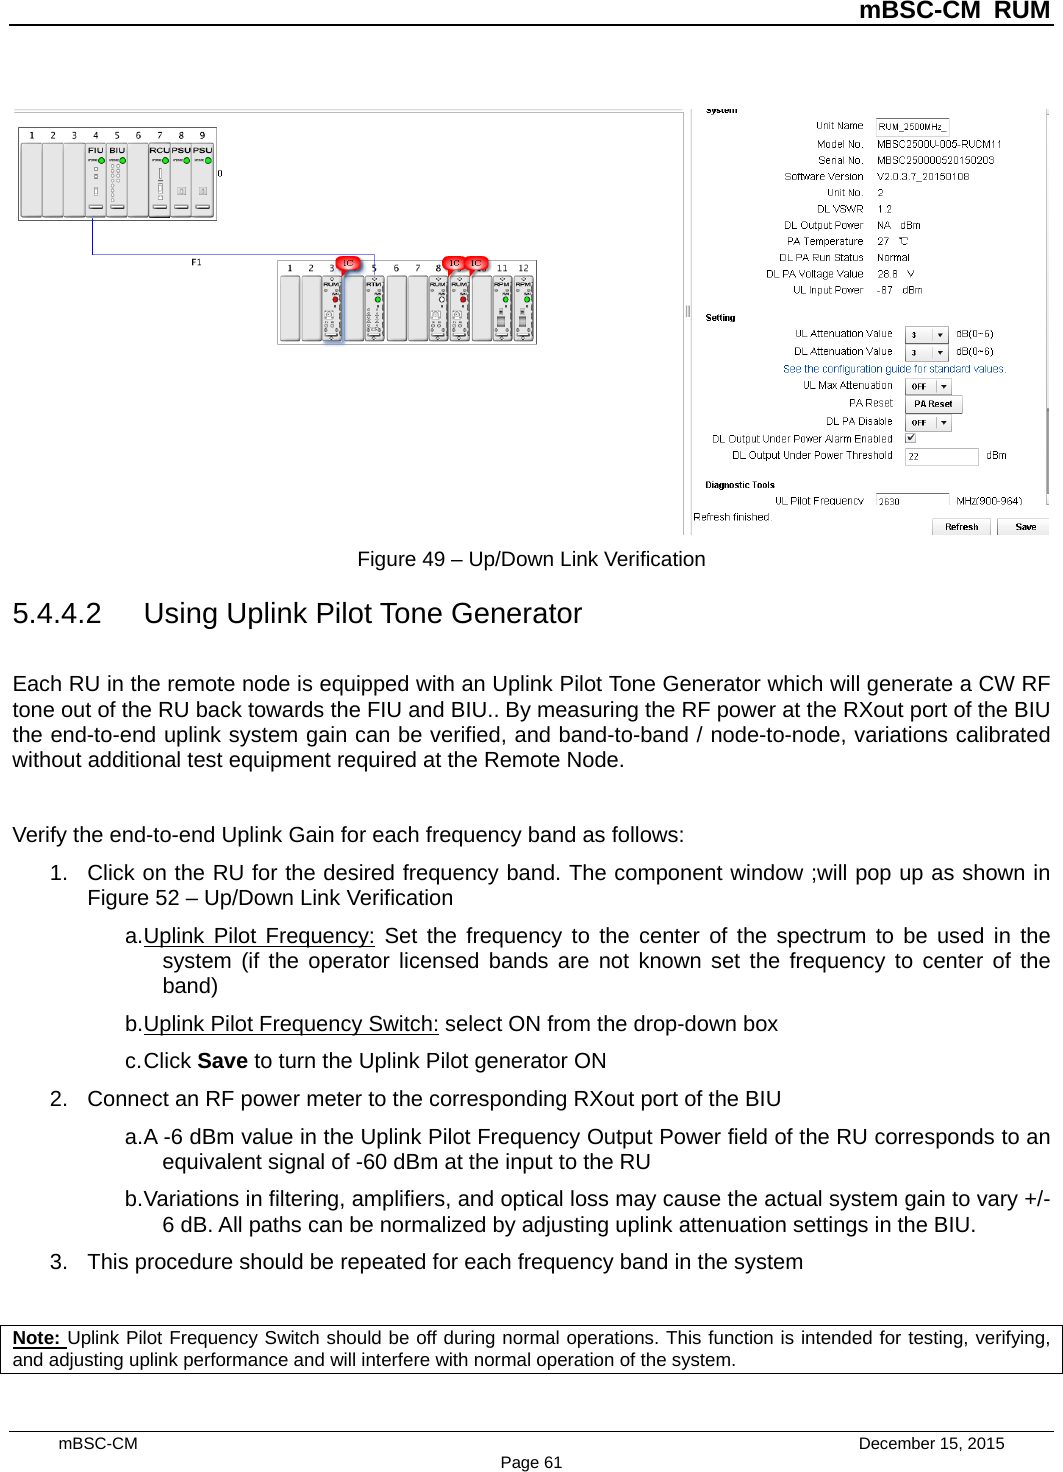          mBSC-CM RUM   mBSC-CM                                 December 15, 2015 Page 61  Figure 49 – Up/Down Link Verification 5.4.4.2 Using Uplink Pilot Tone Generator Each RU in the remote node is equipped with an Uplink Pilot Tone Generator which will generate a CW RF tone out of the RU back towards the FIU and BIU.. By measuring the RF power at the RXout port of the BIU the end-to-end uplink system gain can be verified, and band-to-band / node-to-node, variations calibrated without additional test equipment required at the Remote Node.  Verify the end-to-end Uplink Gain for each frequency band as follows: 1. Click on the RU for the desired frequency band. The component window ;will pop up as shown in Figure 52 – Up/Down Link Verification a. Uplink Pilot Frequency: Set the frequency to the center of the spectrum to be used in the system (if the operator licensed bands are not known set the frequency to center of the band) b. Uplink Pilot Frequency Switch: select ON from the drop-down box c. Click Save to turn the Uplink Pilot generator ON 2. Connect an RF power meter to the corresponding RXout port of the BIU a. A -6 dBm value in the Uplink Pilot Frequency Output Power field of the RU corresponds to an equivalent signal of -60 dBm at the input to the RU b. Variations in filtering, amplifiers, and optical loss may cause the actual system gain to vary +/- 6 dB. All paths can be normalized by adjusting uplink attenuation settings in the BIU. 3. This procedure should be repeated for each frequency band in the system  Note: Uplink Pilot Frequency Switch should be off during normal operations. This function is intended for testing, verifying, and adjusting uplink performance and will interfere with normal operation of the system. 